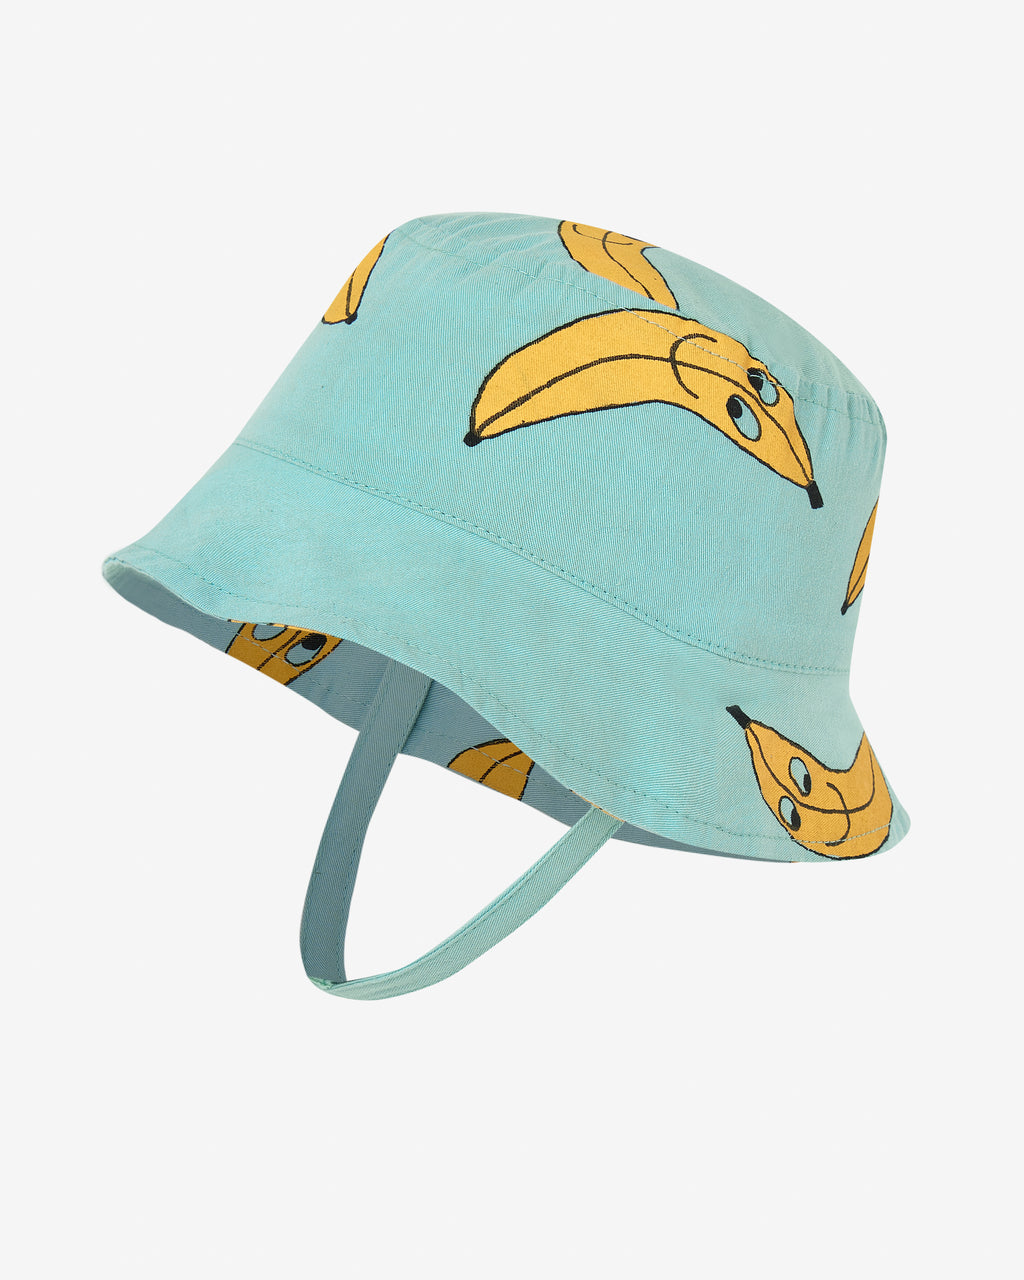 Turquoise bucket-style sun hat with a yellow bananas all-over print. This hat comes with 2 straps to make it easier to fit on the child's head. Made by Nadadelazos